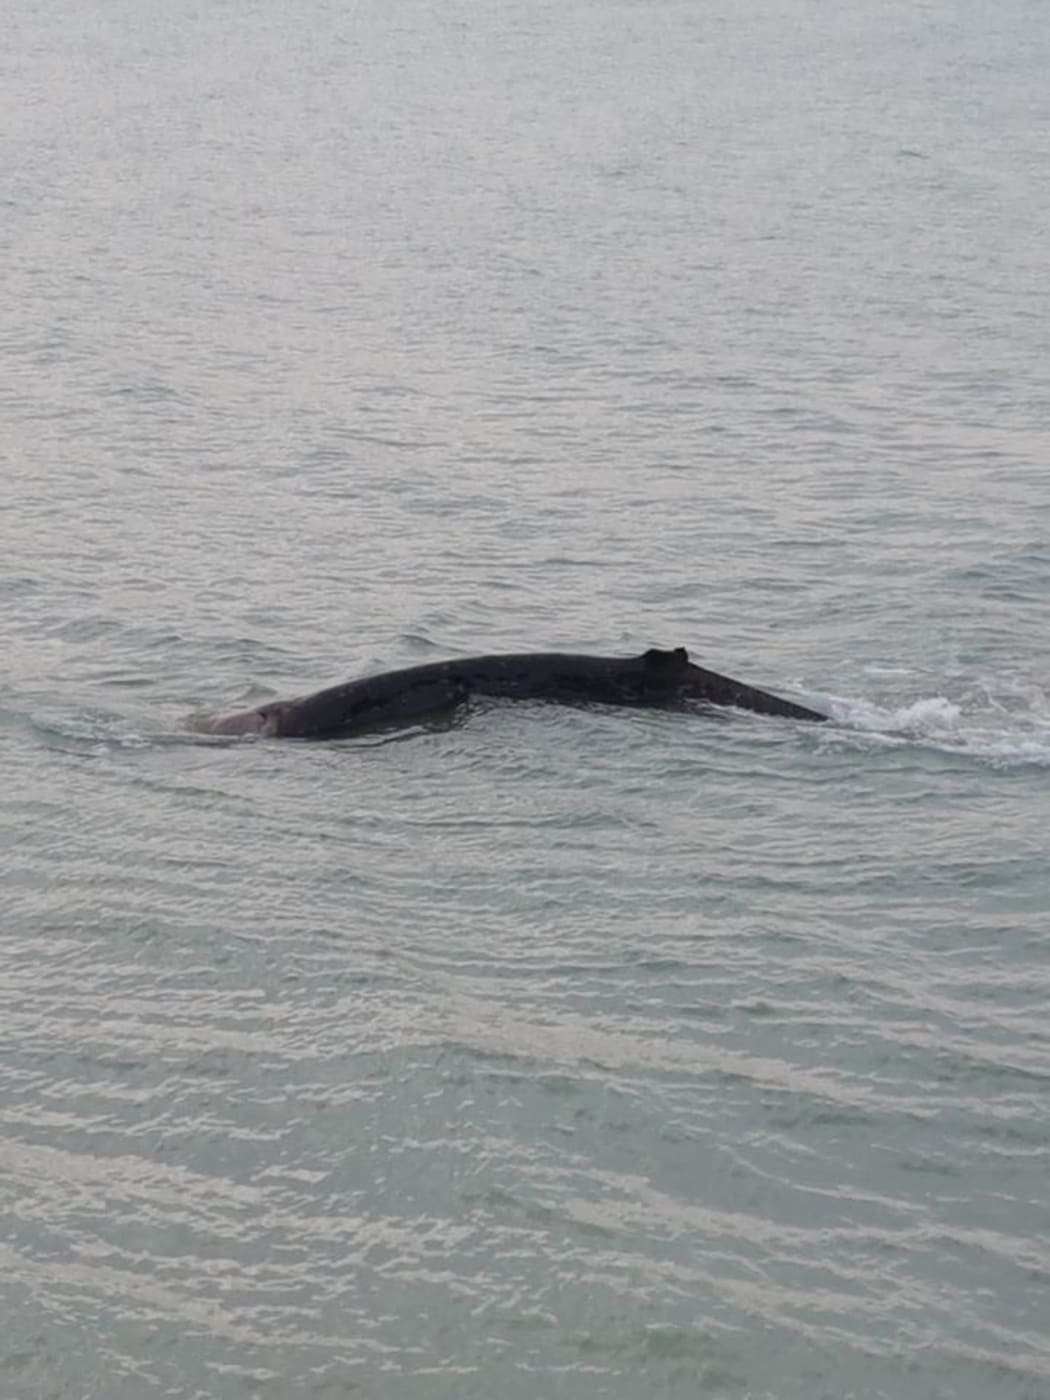 A whale was refloated several times at Caroline Bay in Timaru but continued to beach and died.